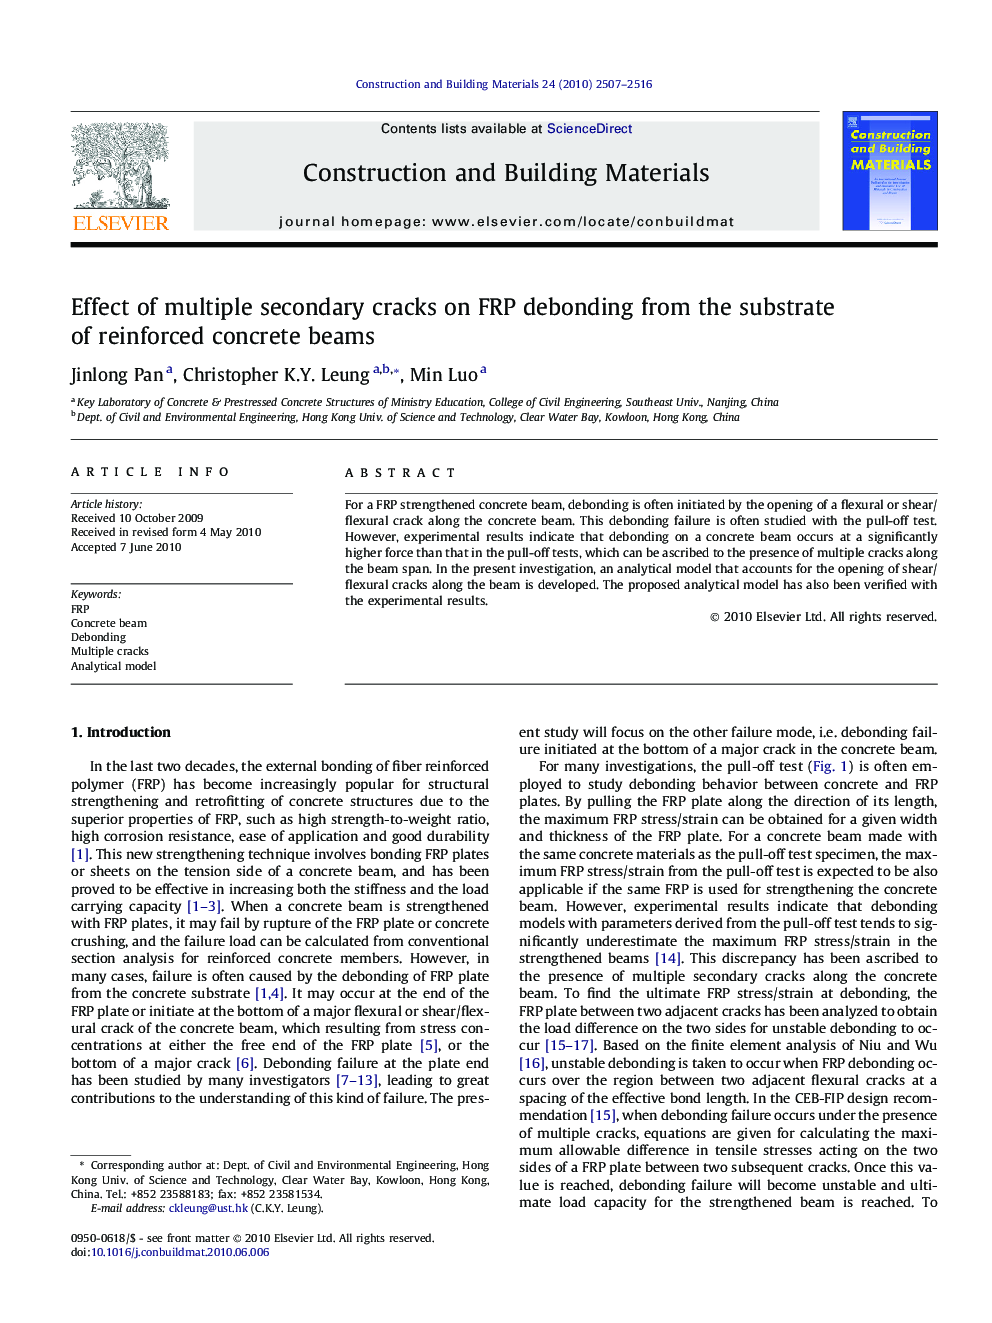 Effect of multiple secondary cracks on FRP debonding from the substrate of reinforced concrete beams